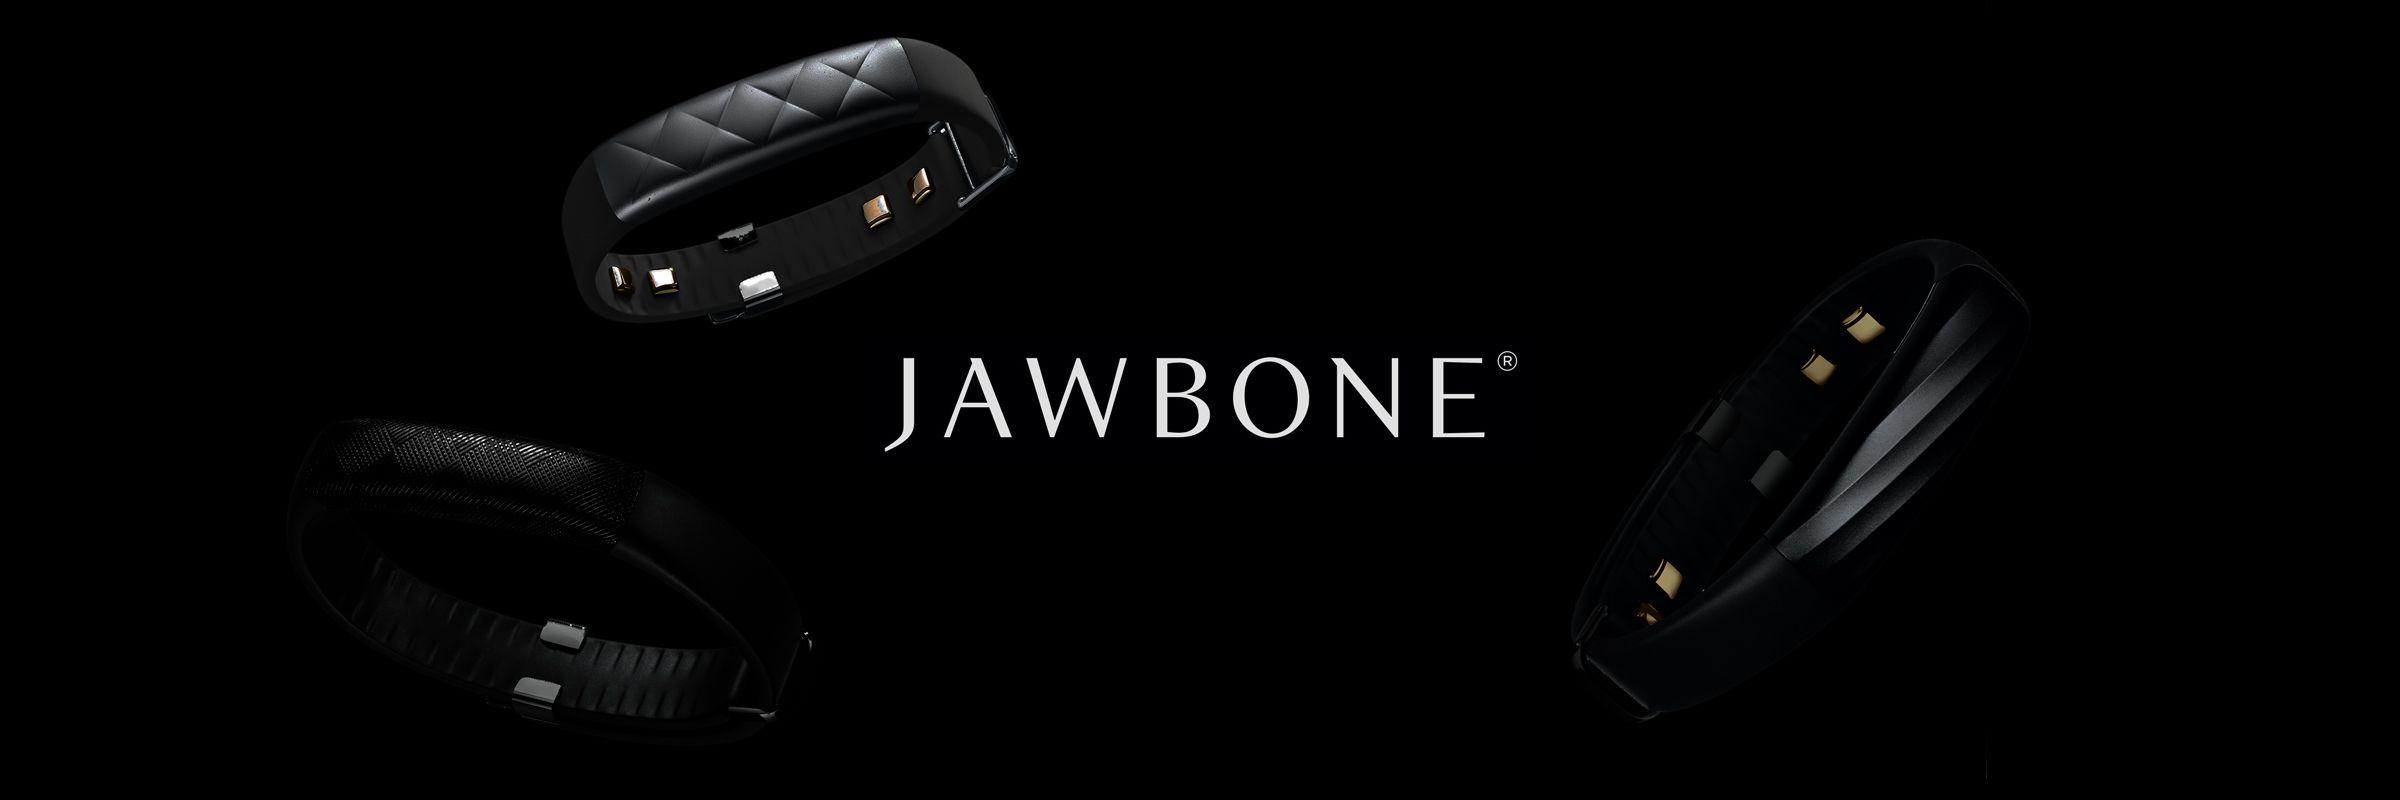 Jawbone Logo - An Update on Jawbone's Recent Pivot, Clinical Health, and the Future ...